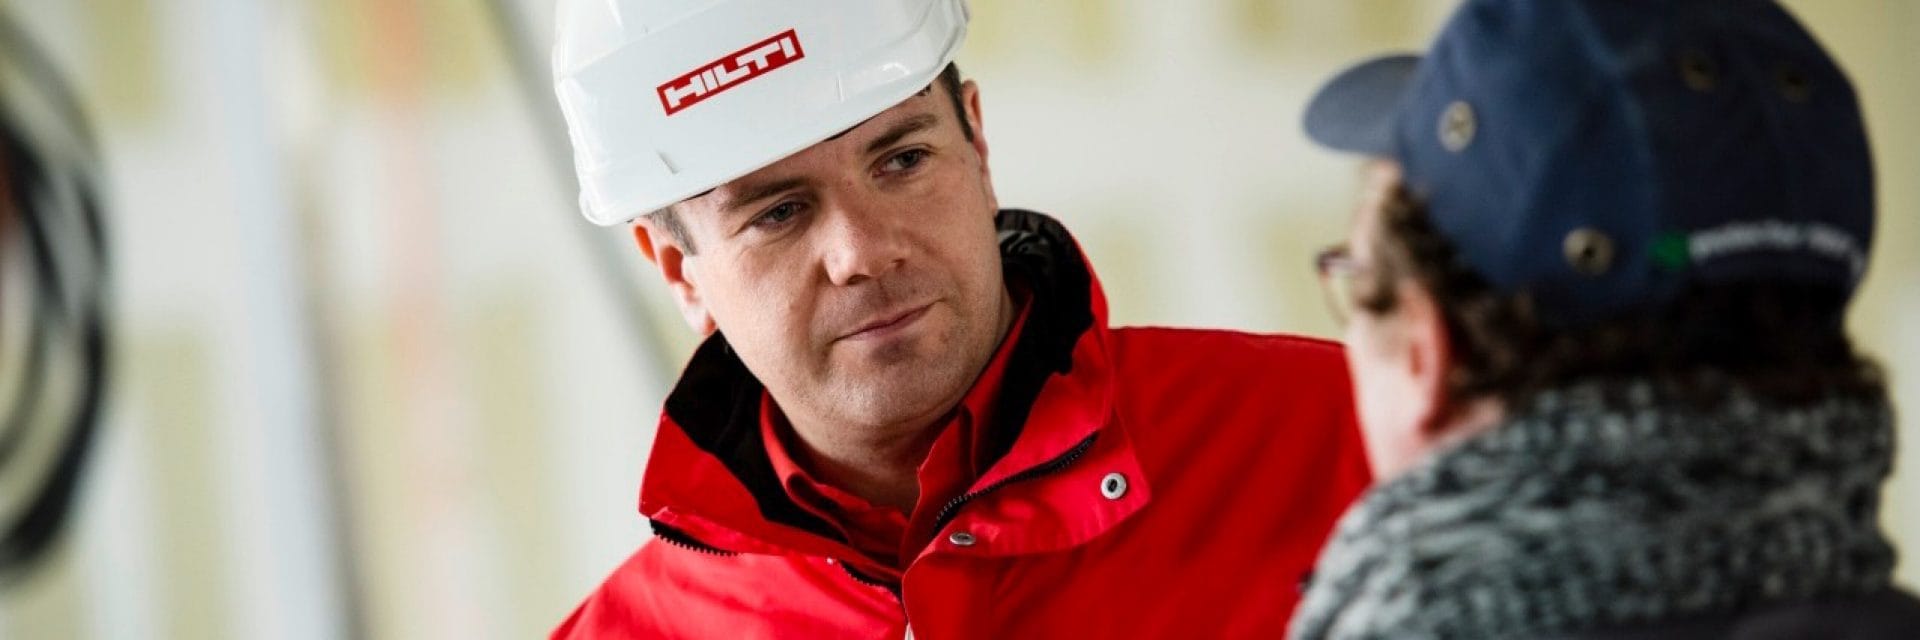 Hilti approach to corporate responsibility